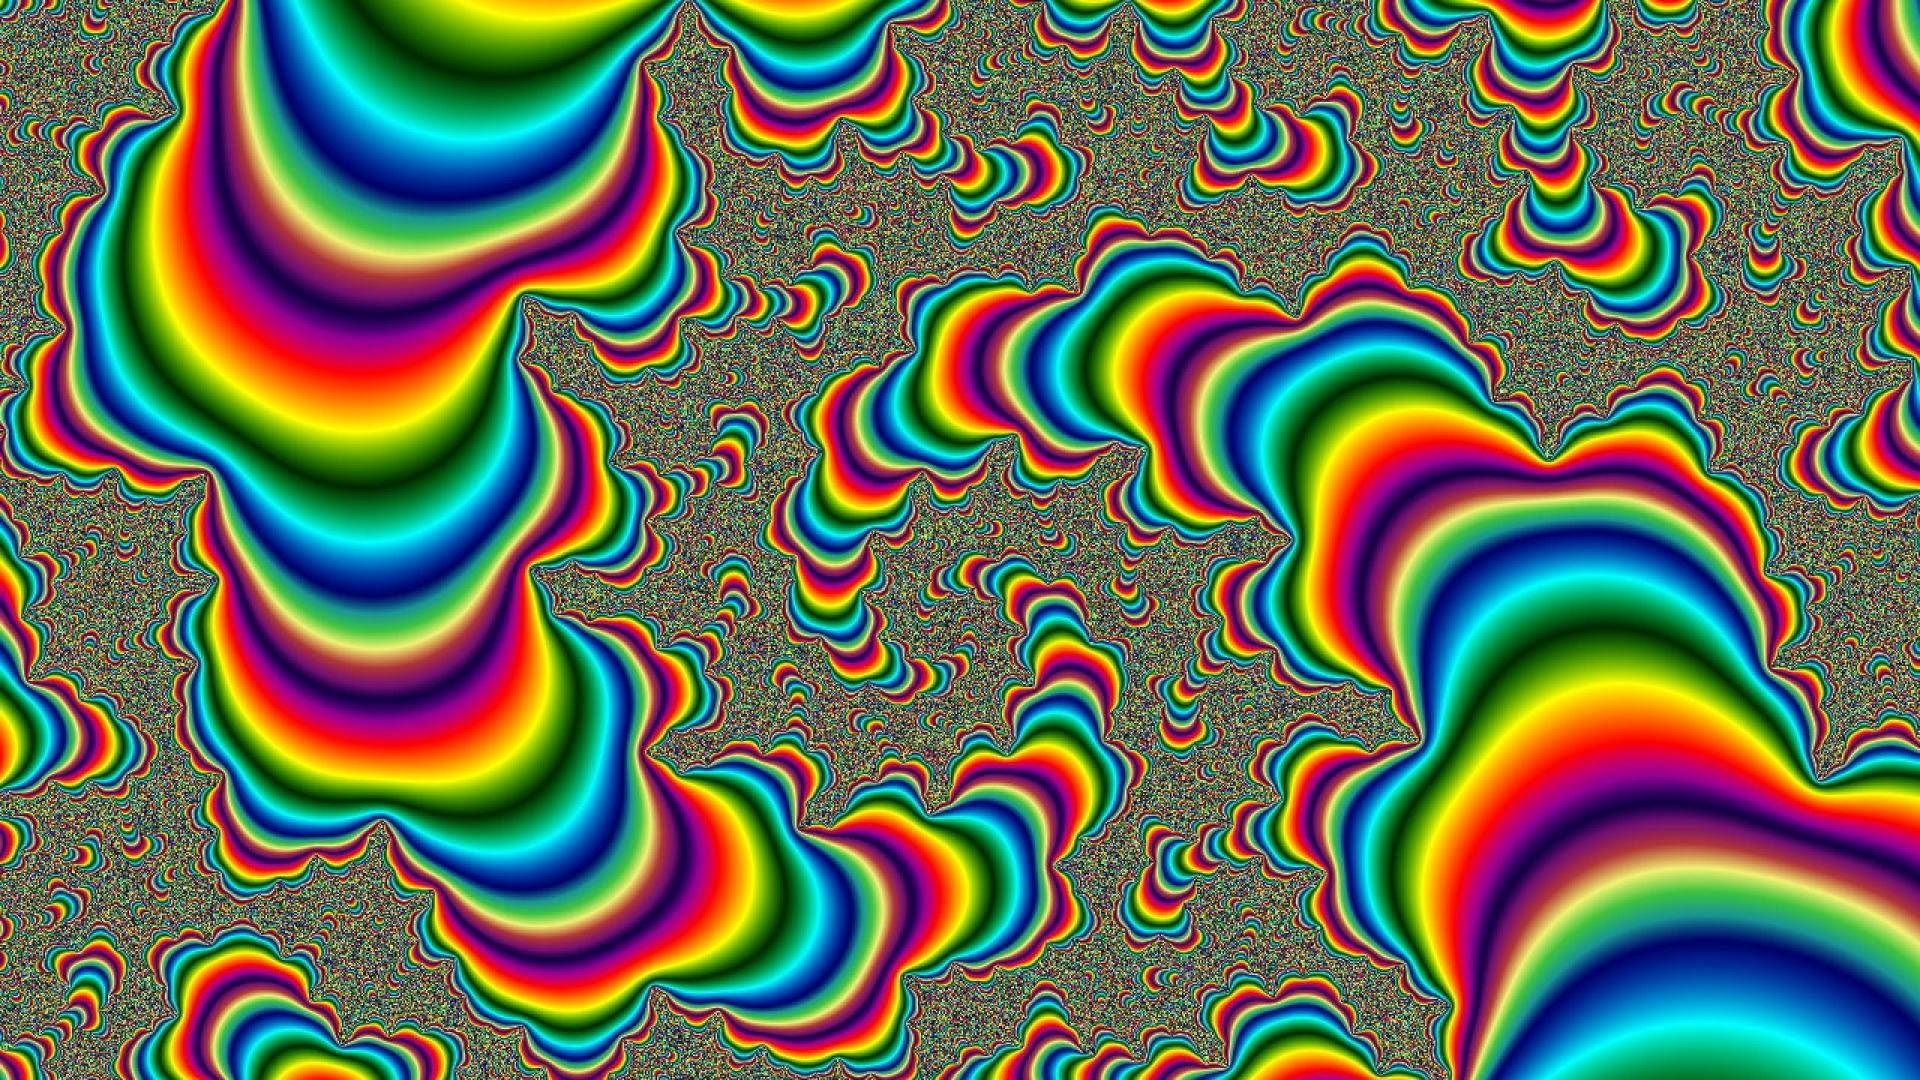 Hd Psychedelic Worms Wallpaper